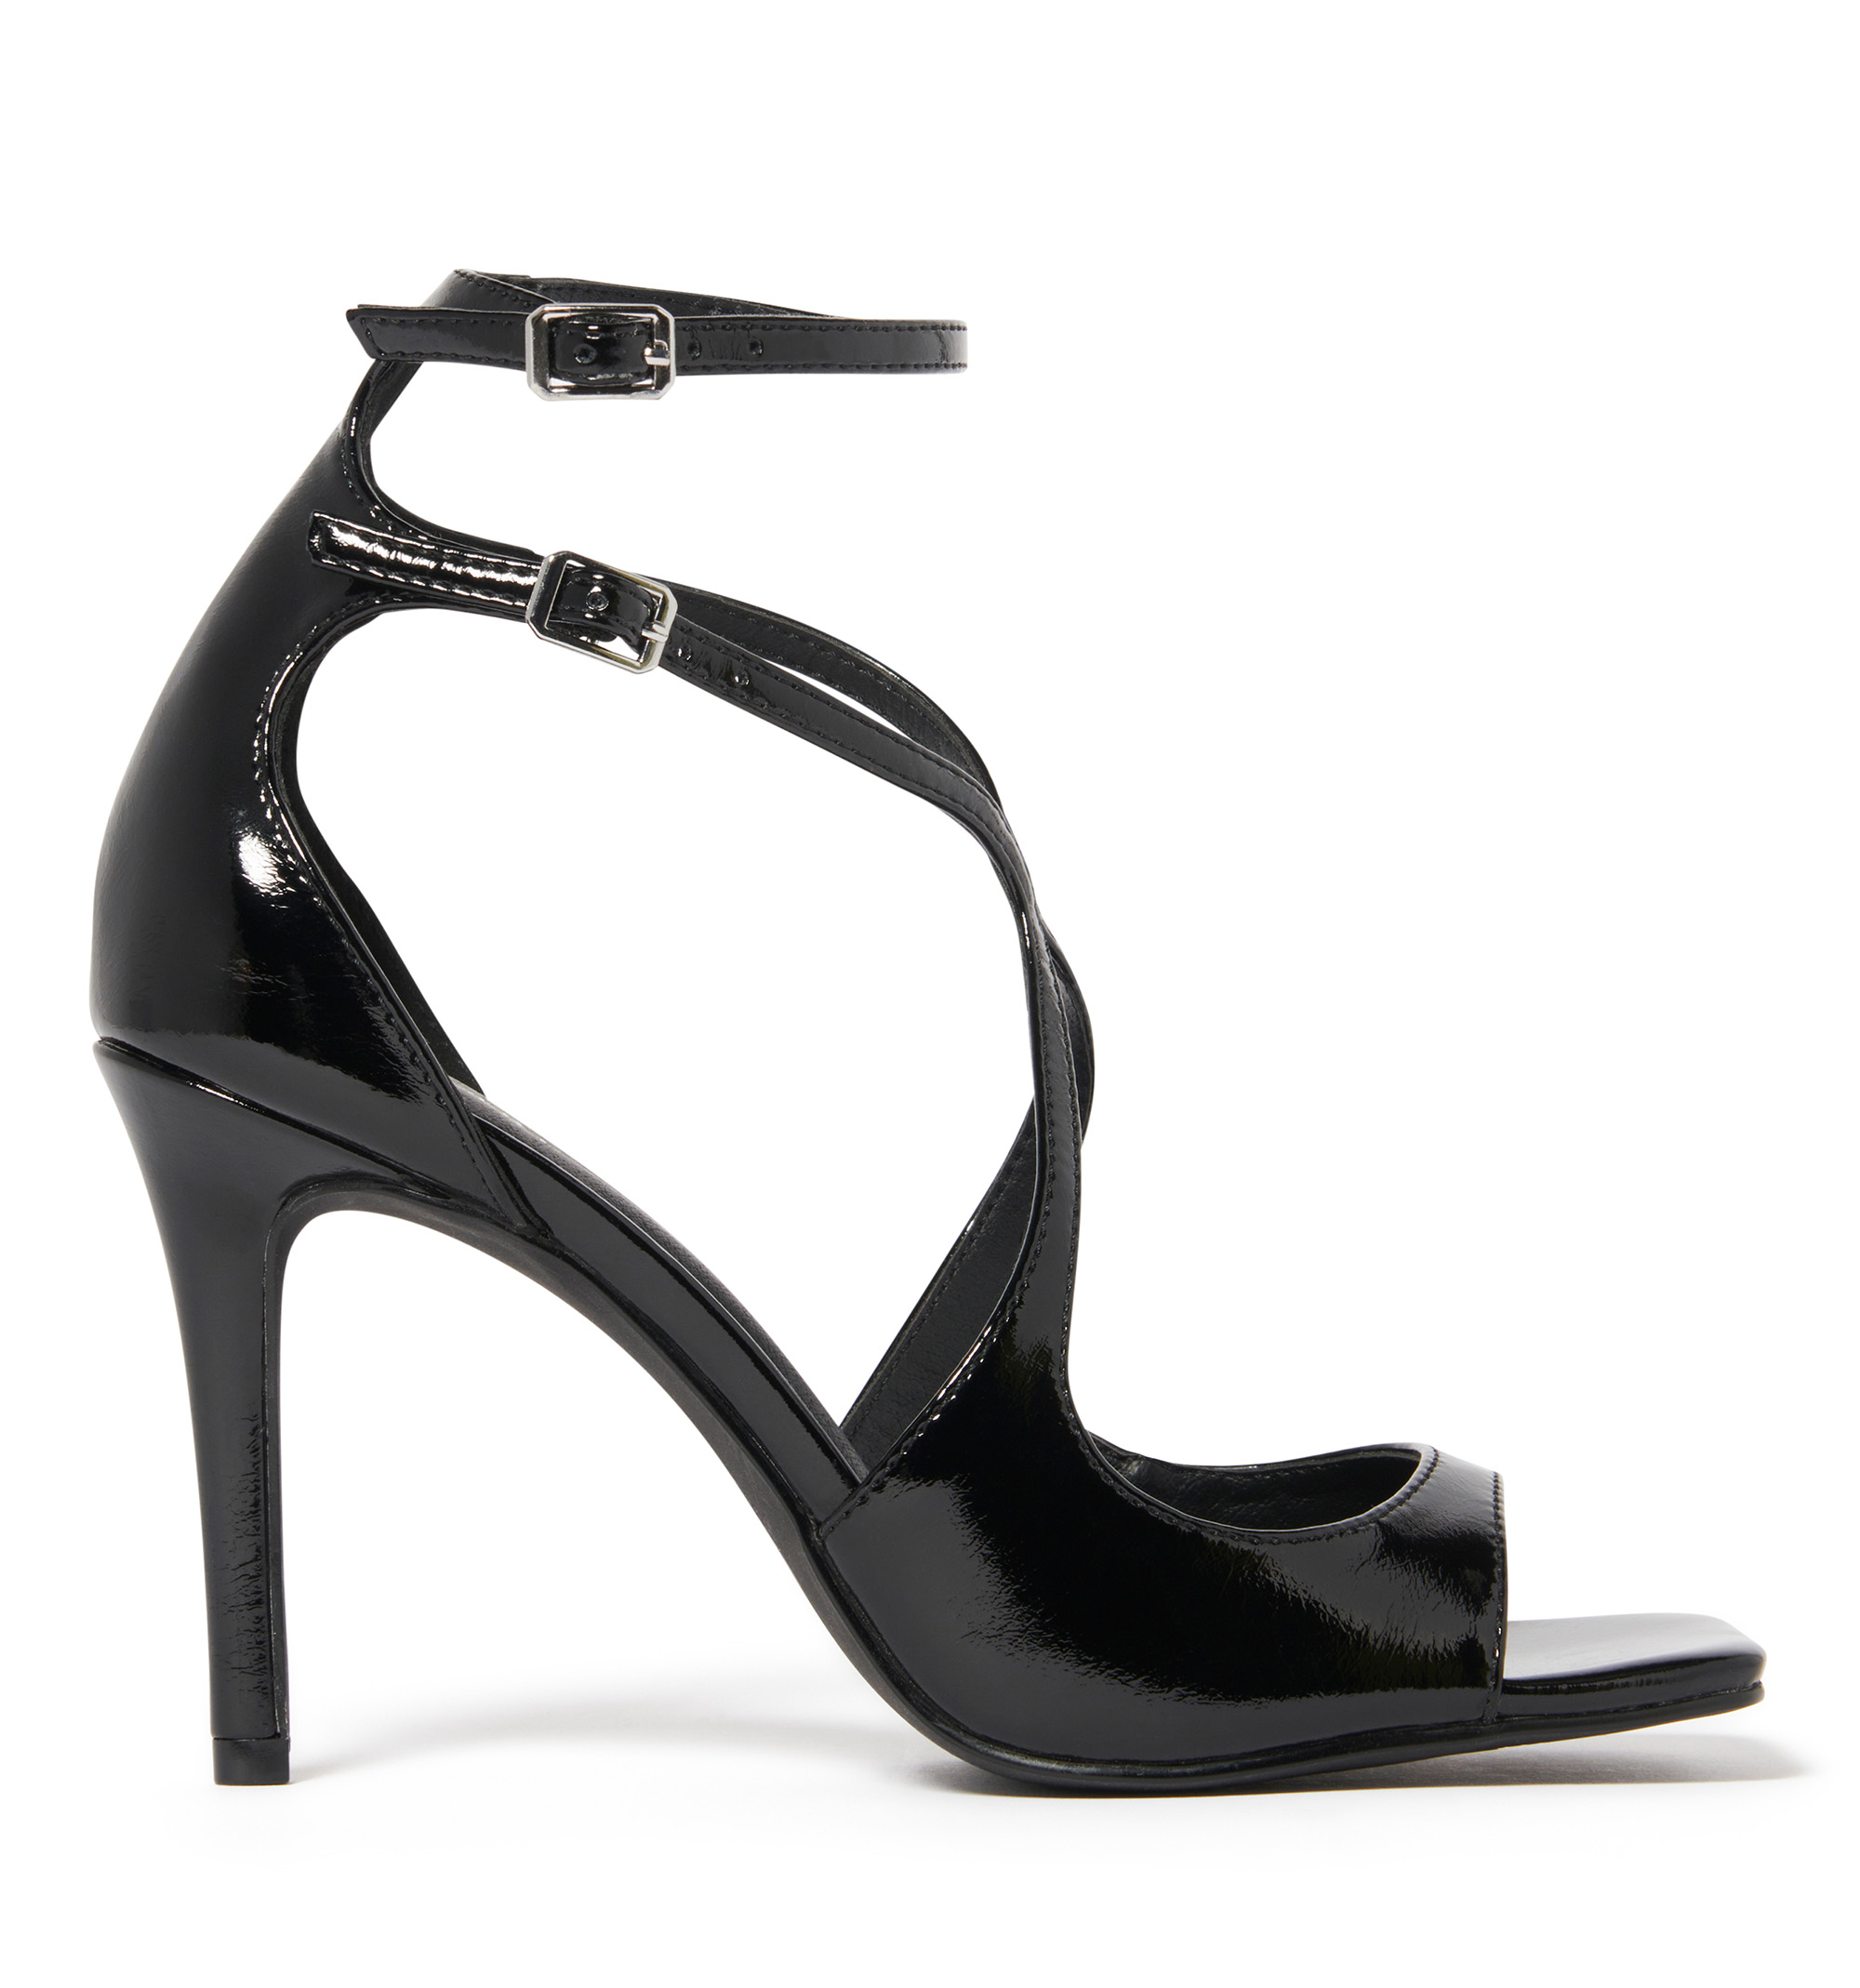 PHOTOS: What High Heels Have Looked Like Every Year